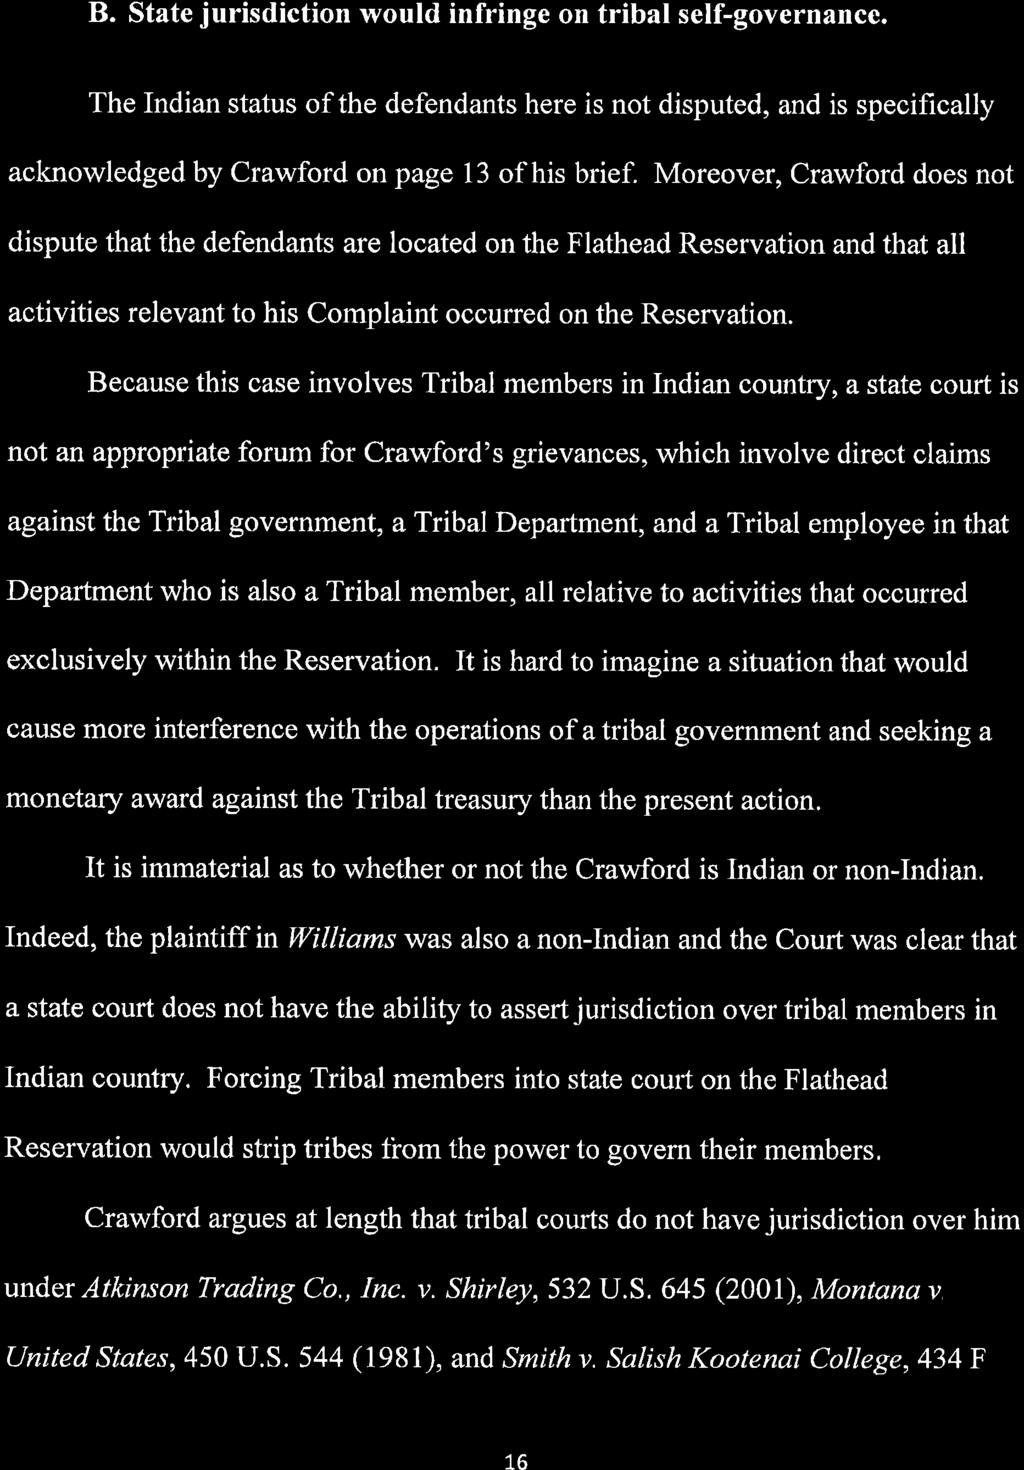 B. State jurisdiction would infringe on tribal self-governance. The Indian status of the defendants here is not disputed, and is specifically acknowledged by Crawford on page 13 of his brief.